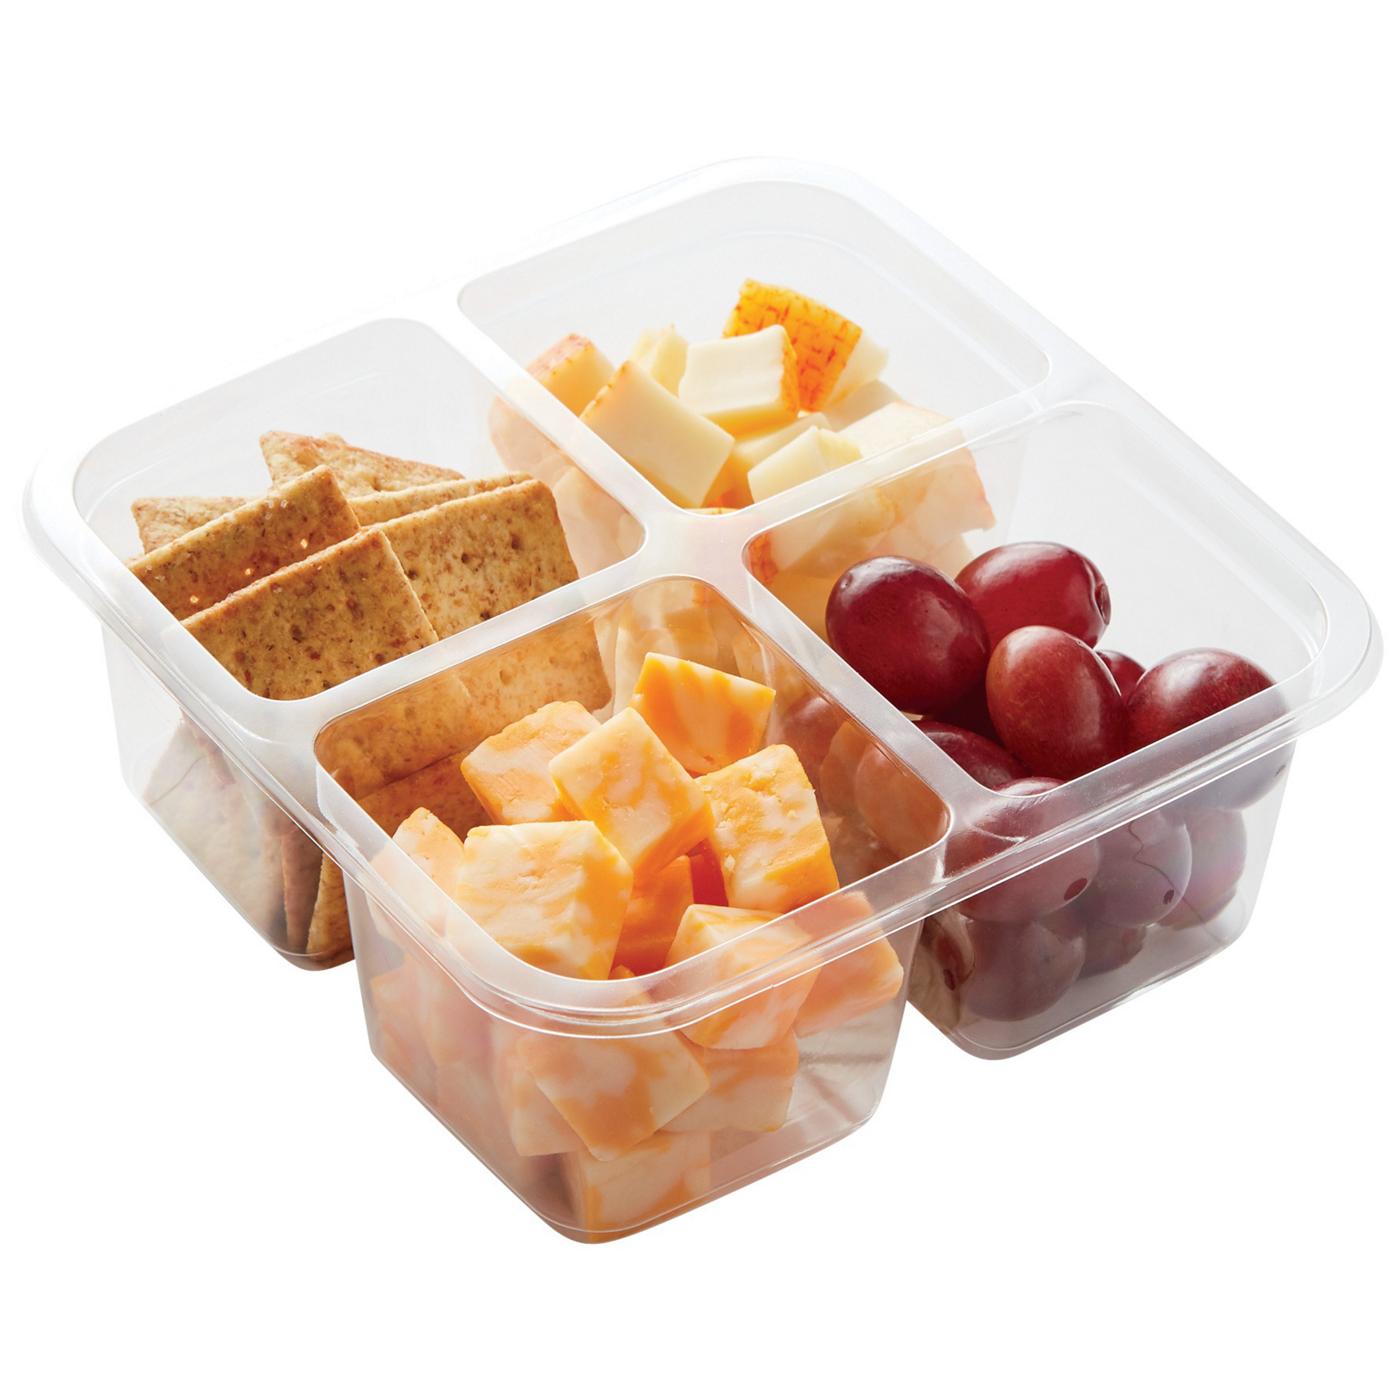 Meal Simple by H-E-B Snack Tray - Sugar Snap Peas, Carrots, Almonds, Hummus  & Trail Mix - Shop Snack Trays at H-E-B